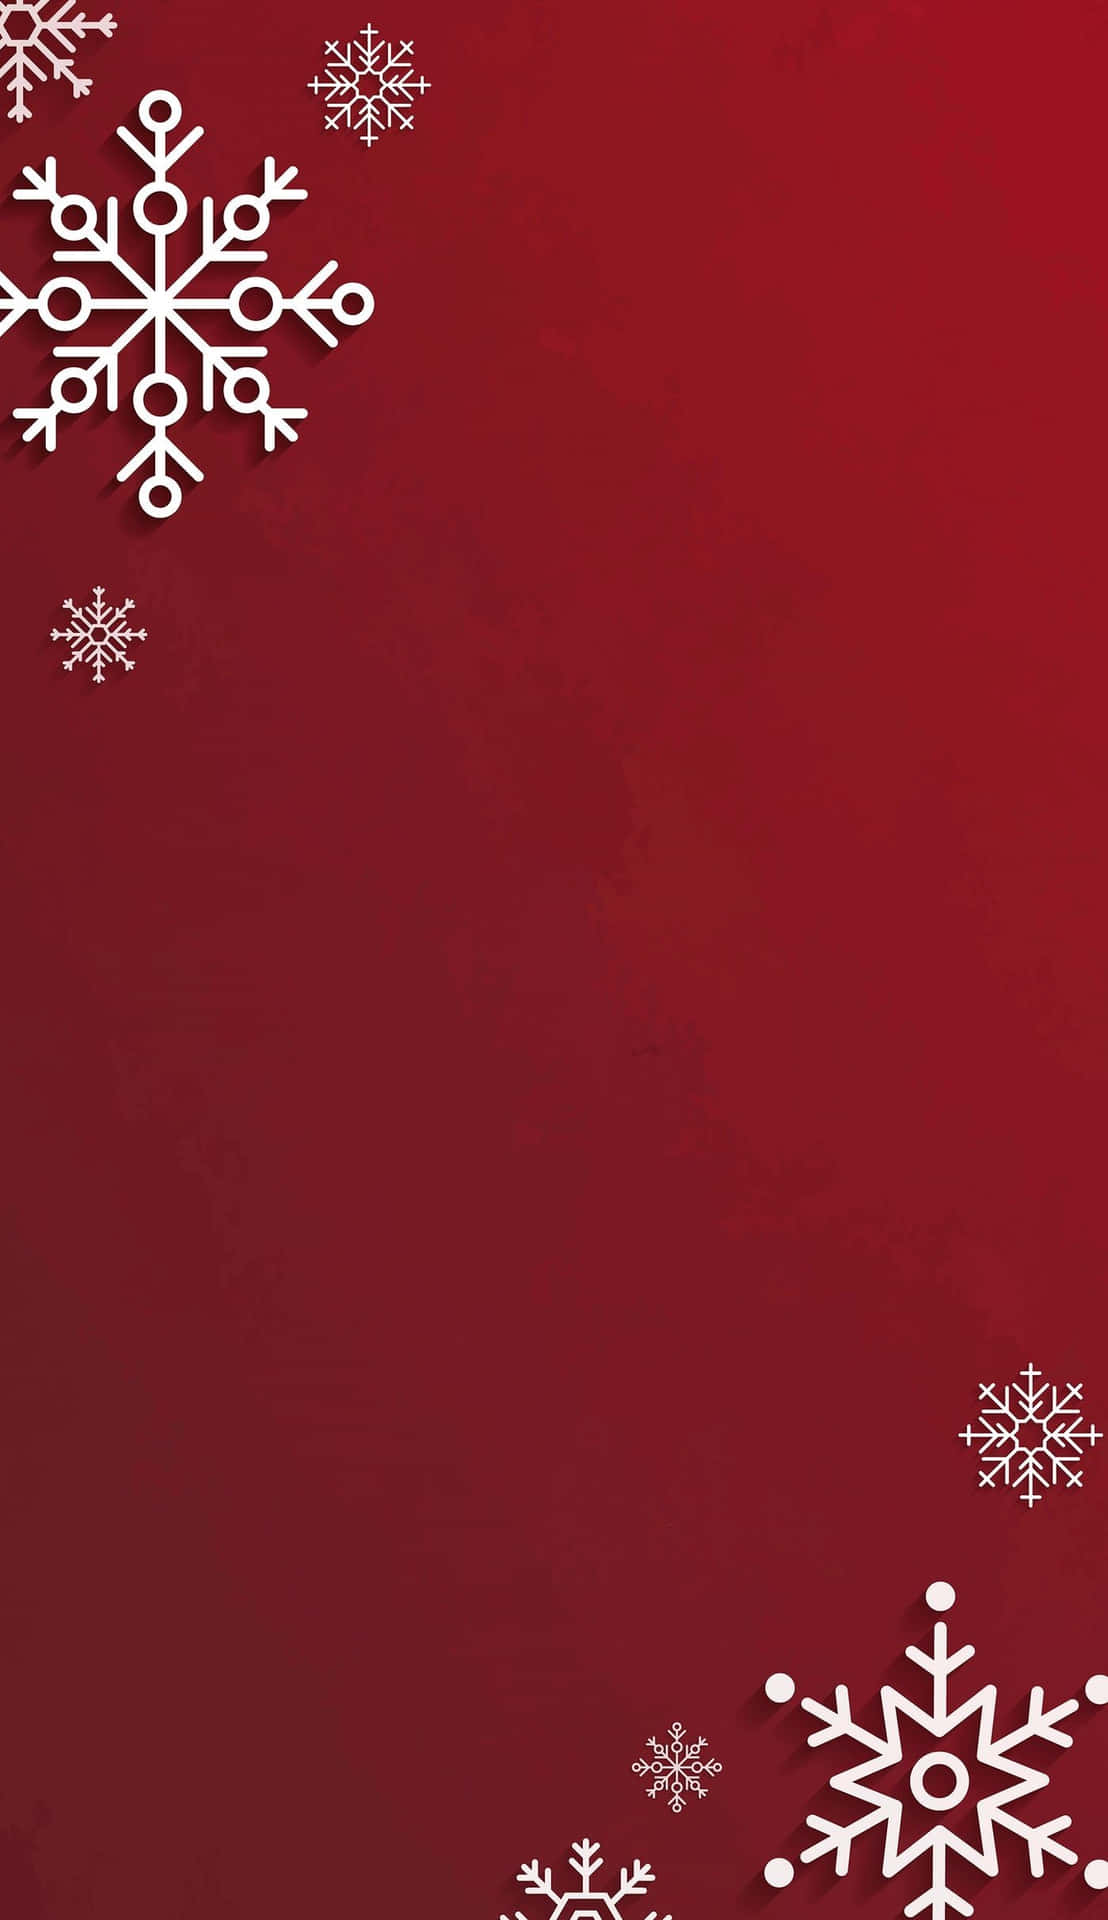 Spread the Joy of Christmas with a Red Iphone Wallpaper